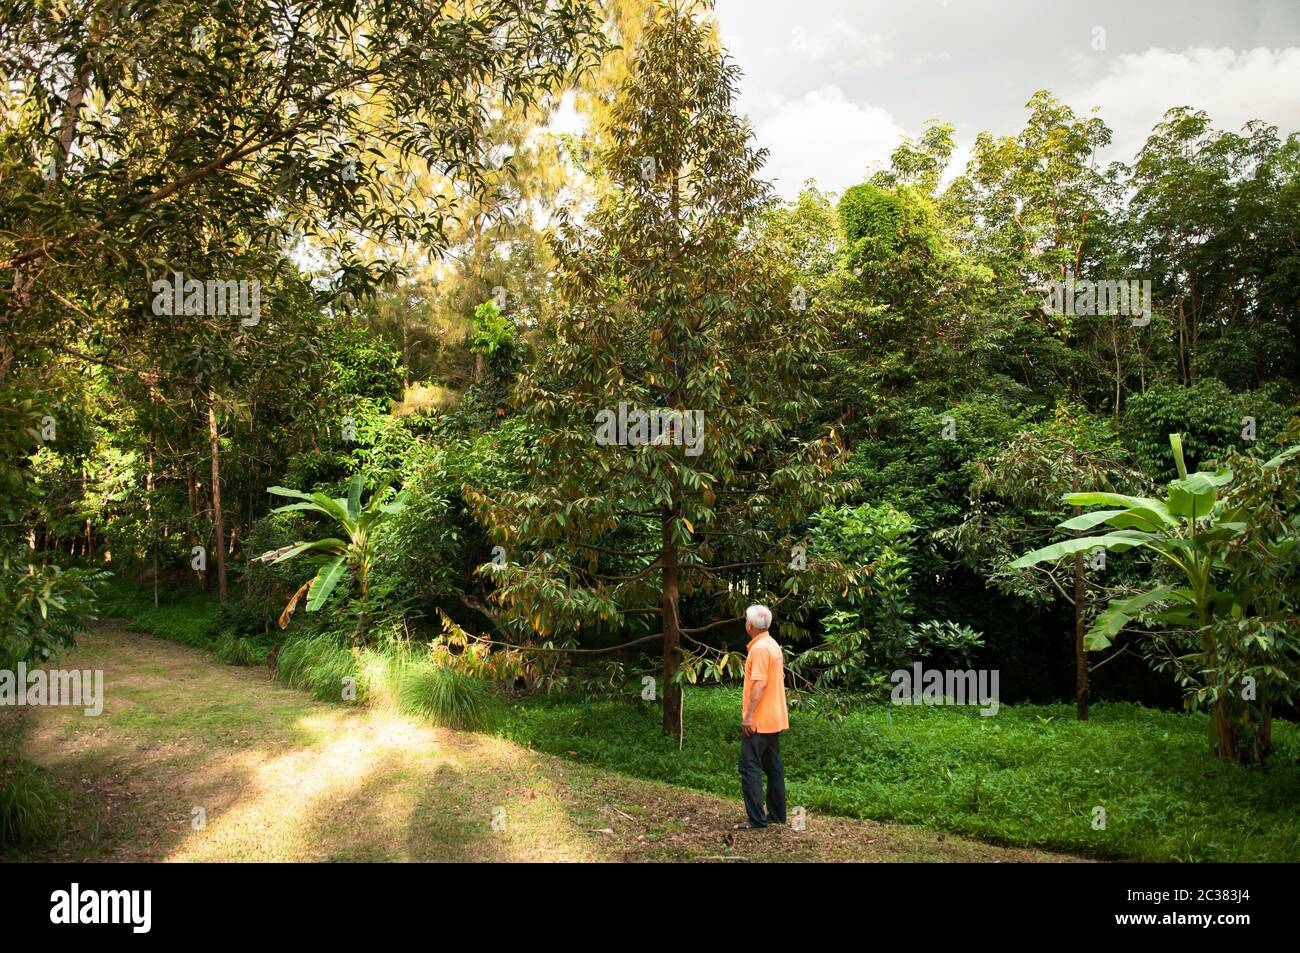 MAY 20, 2018 Hua Hin, Thailand - Durian tree in lush green tropical orchard in Thailand with farmer against warm evening sunlight Stock Photo